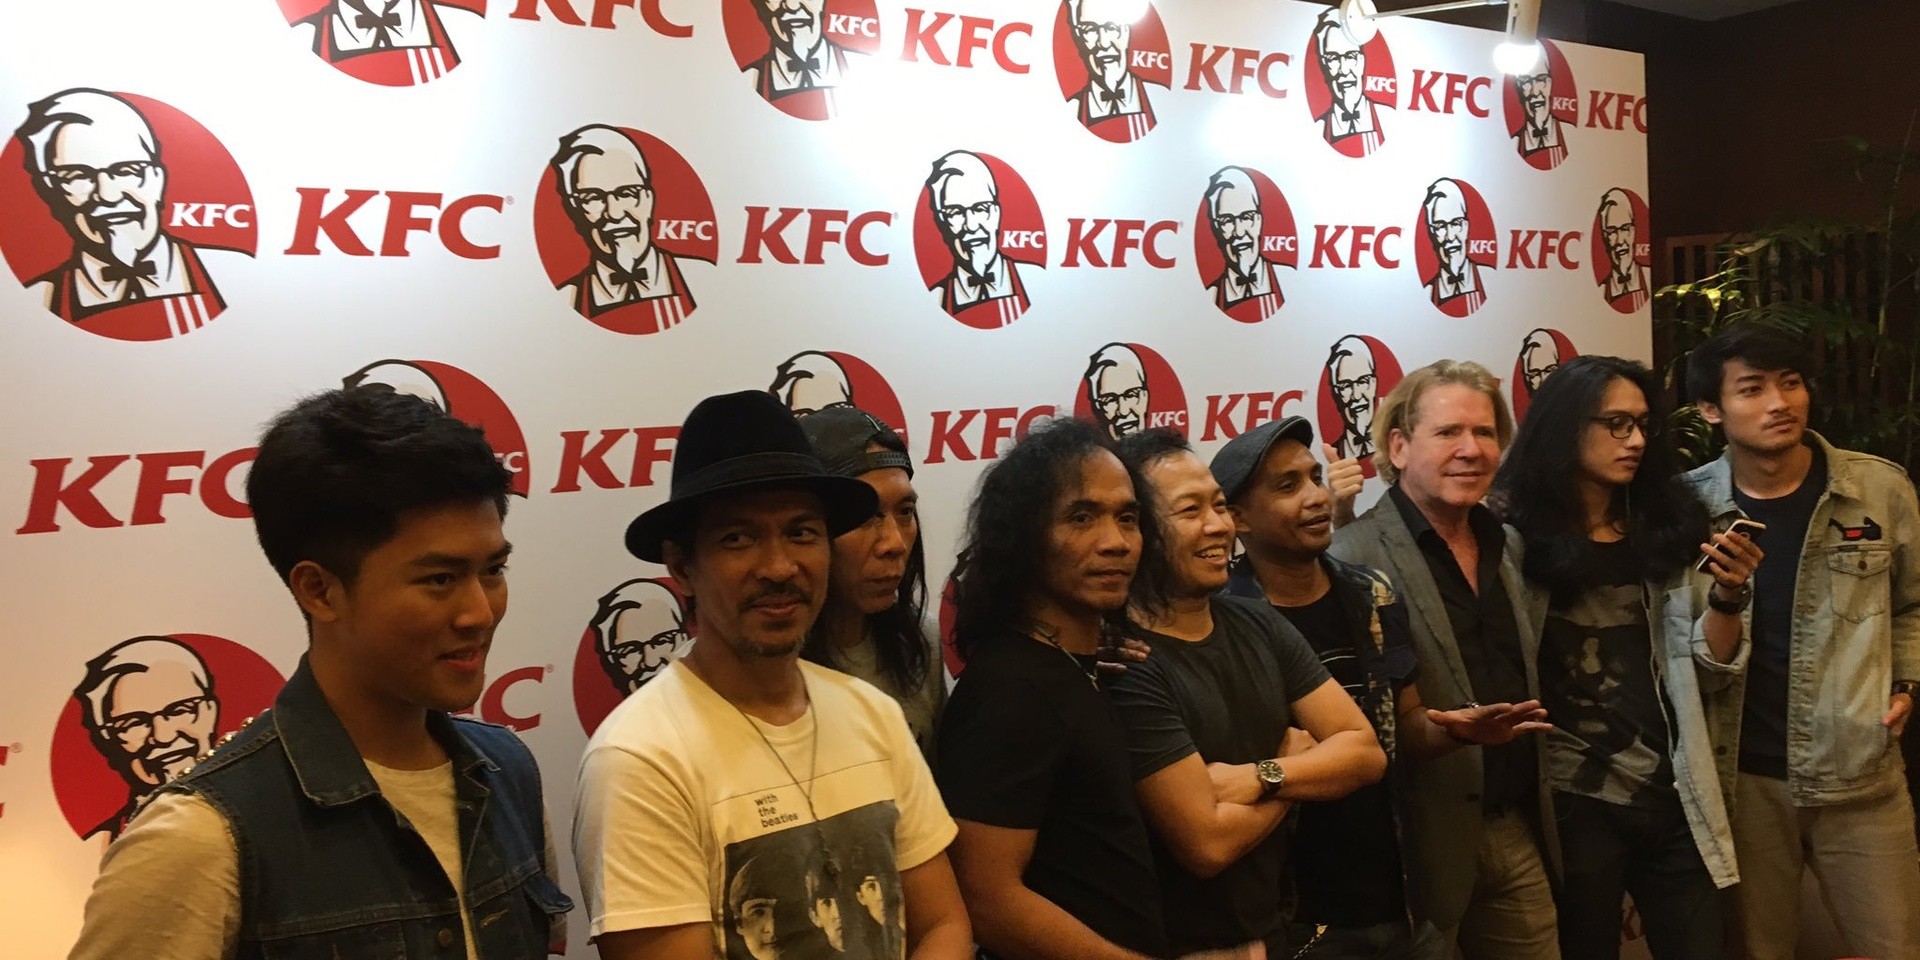 U2 producer Steve Lillywhite now sells CDs in Indonesia through KFCs